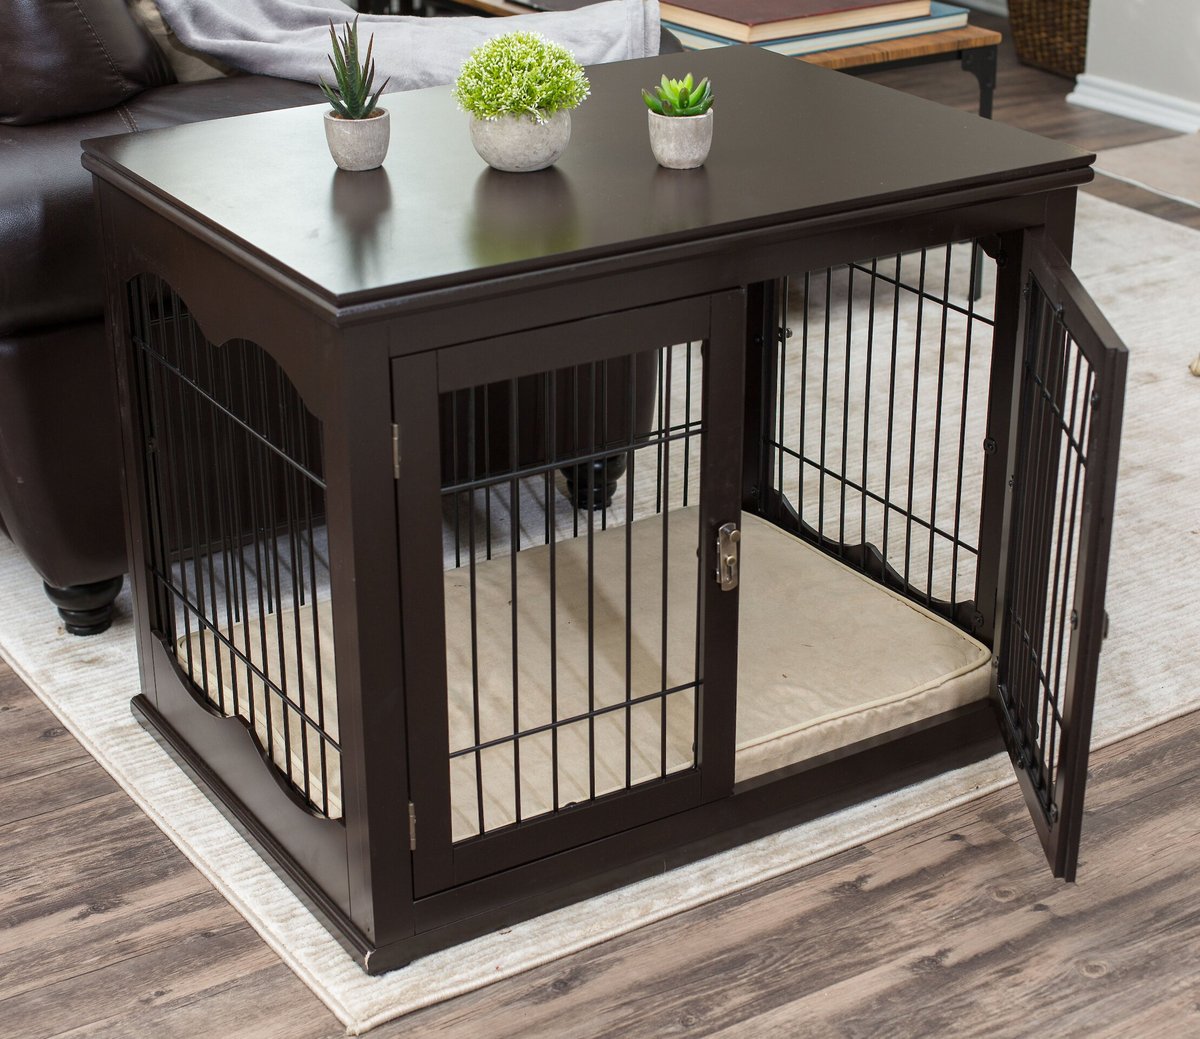 INTERNET'S BEST Double Door Furniture Style Dog Crate & End Table